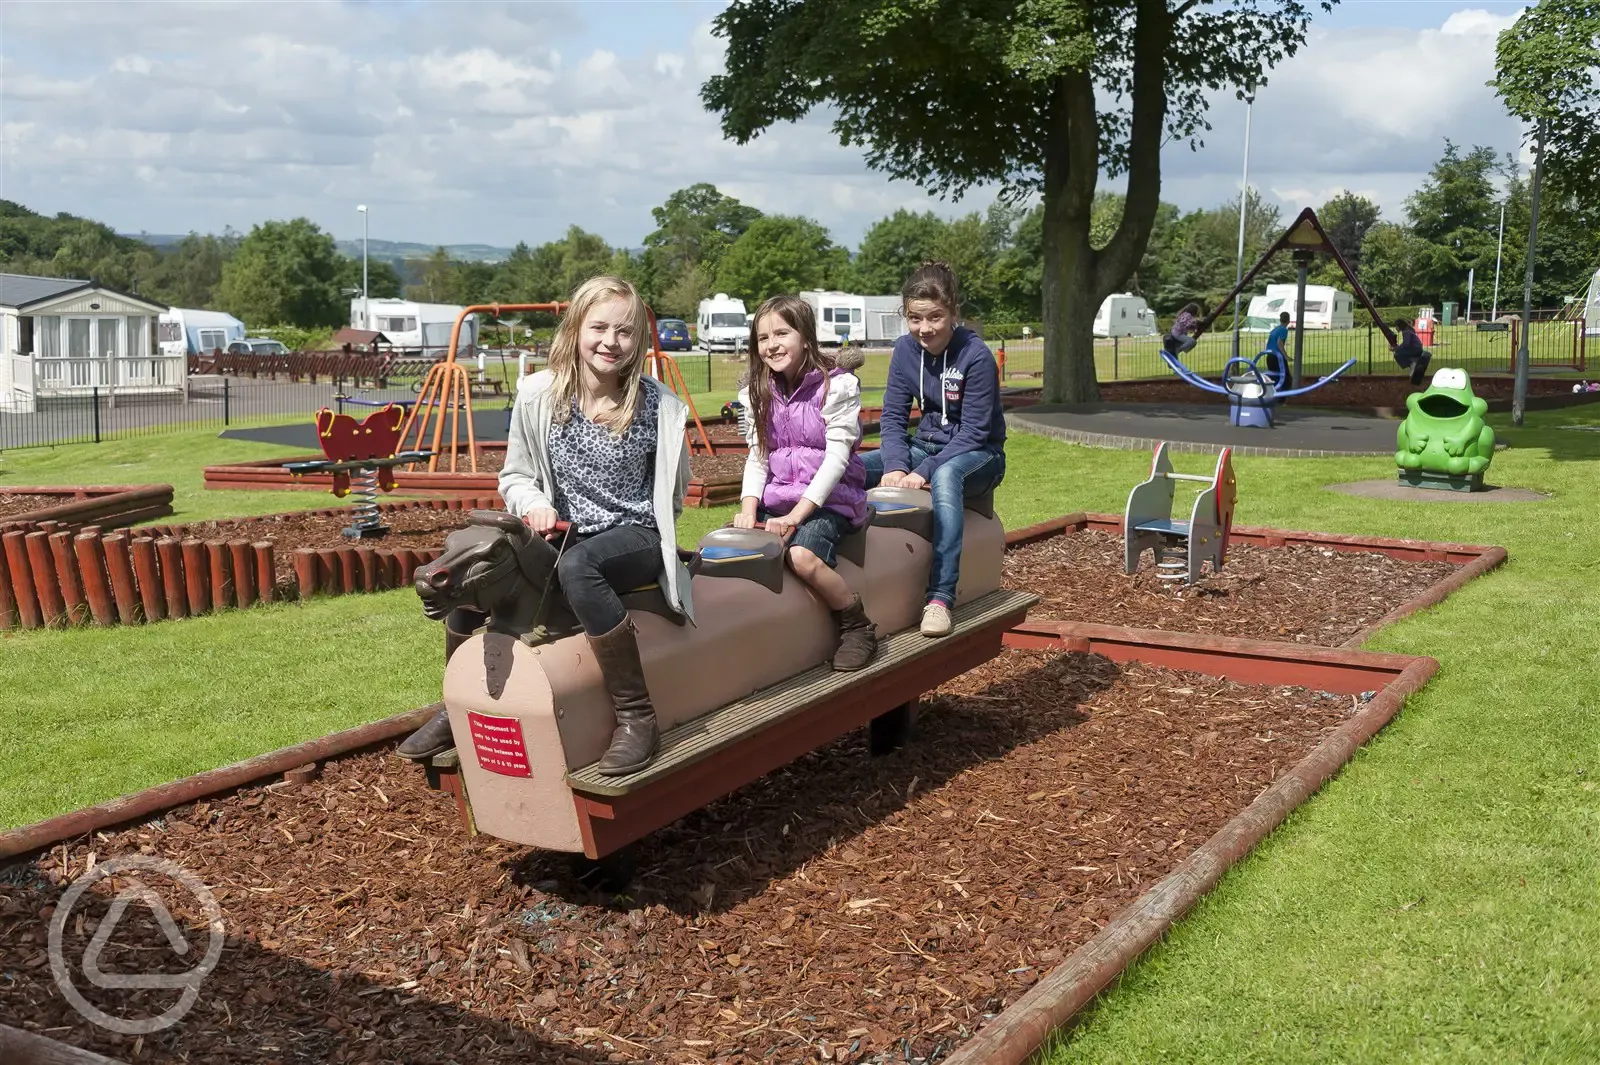 Children playing in the play area at Alton the Star